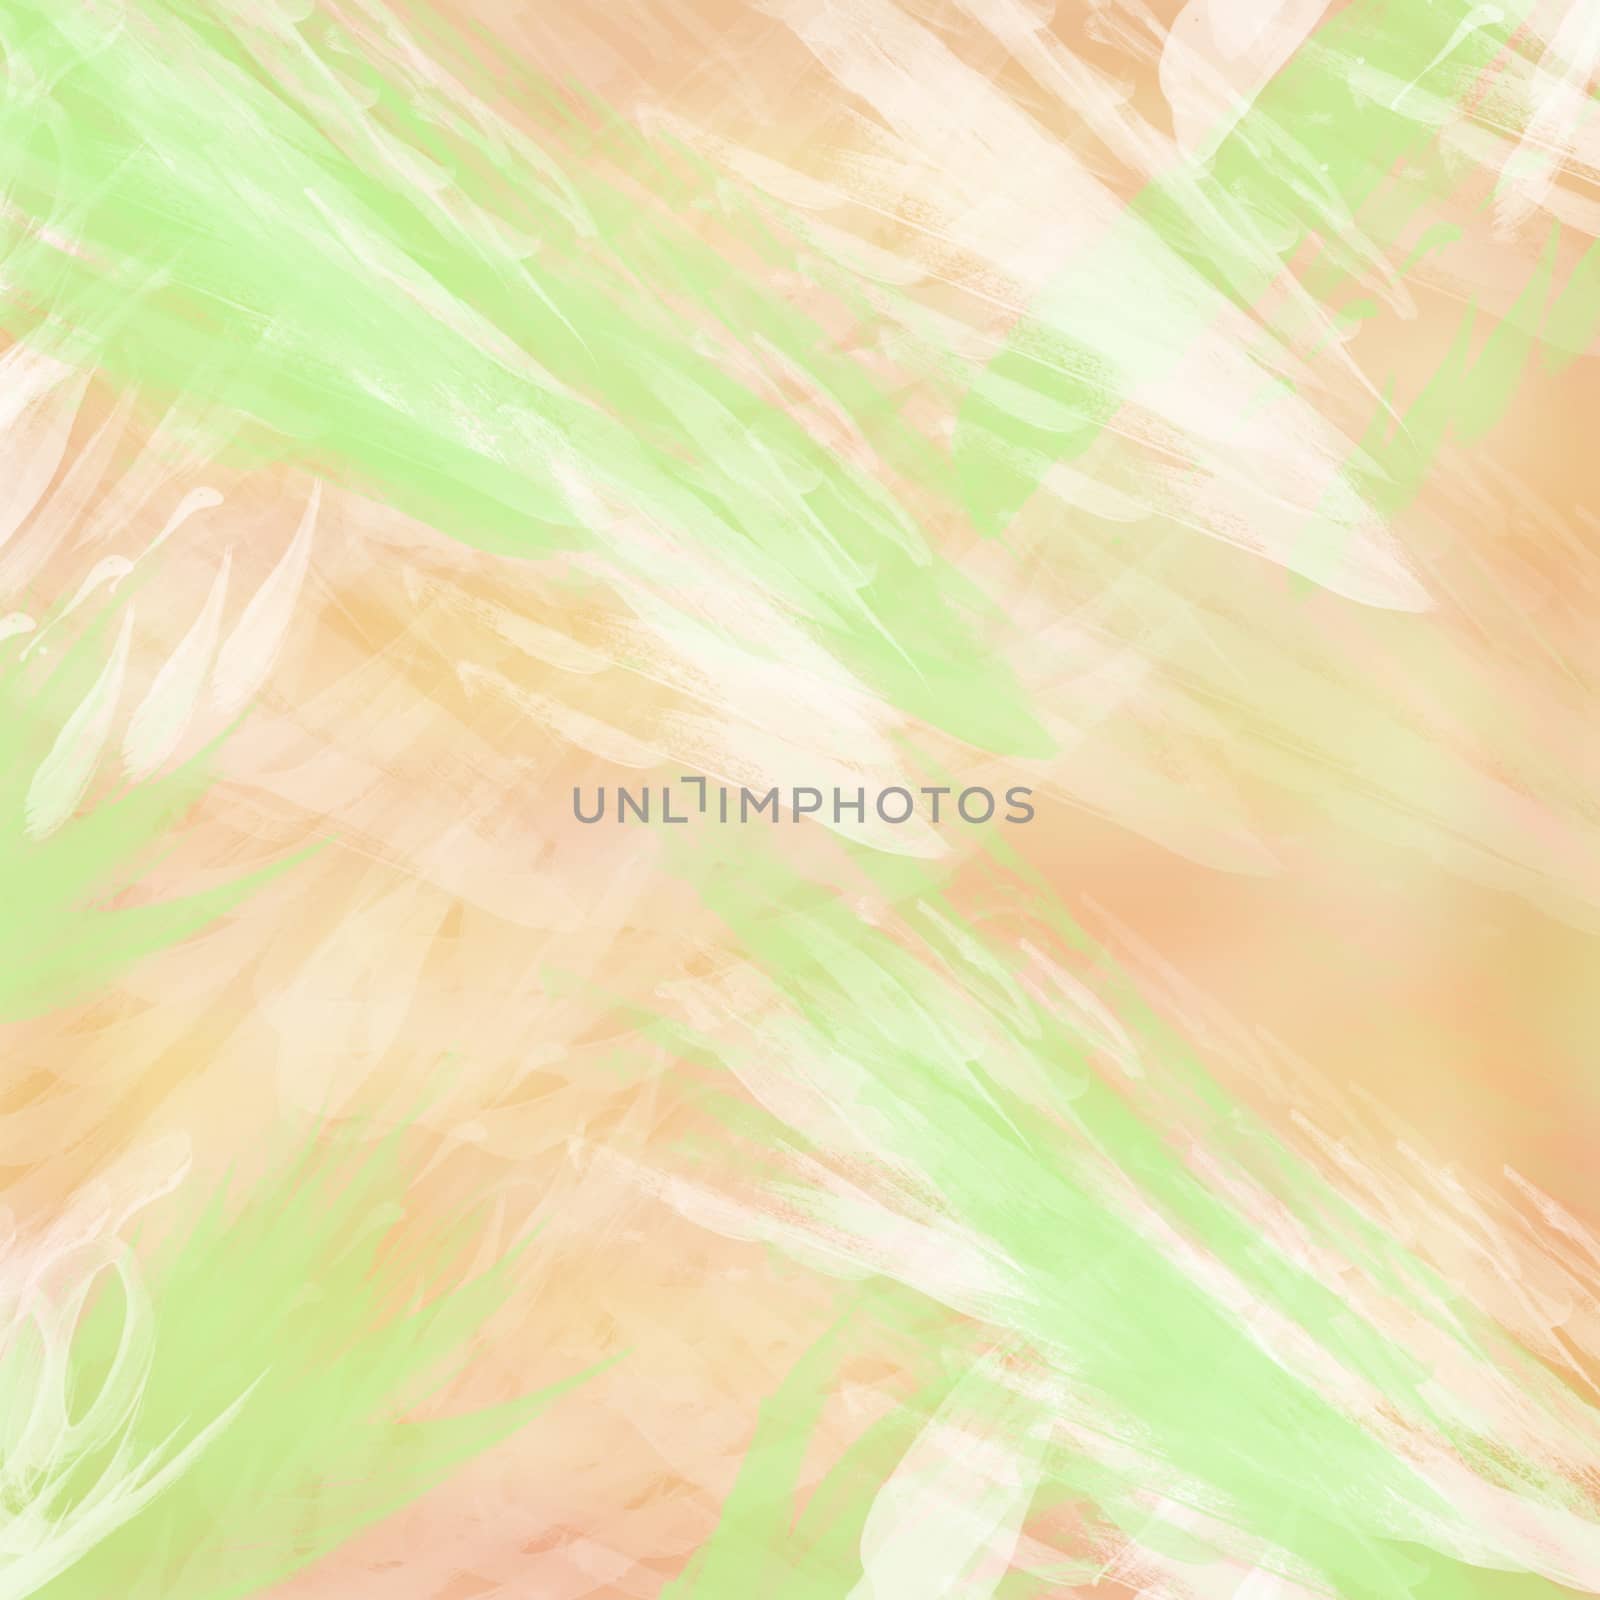 Background with brush strokes in pastel colors.